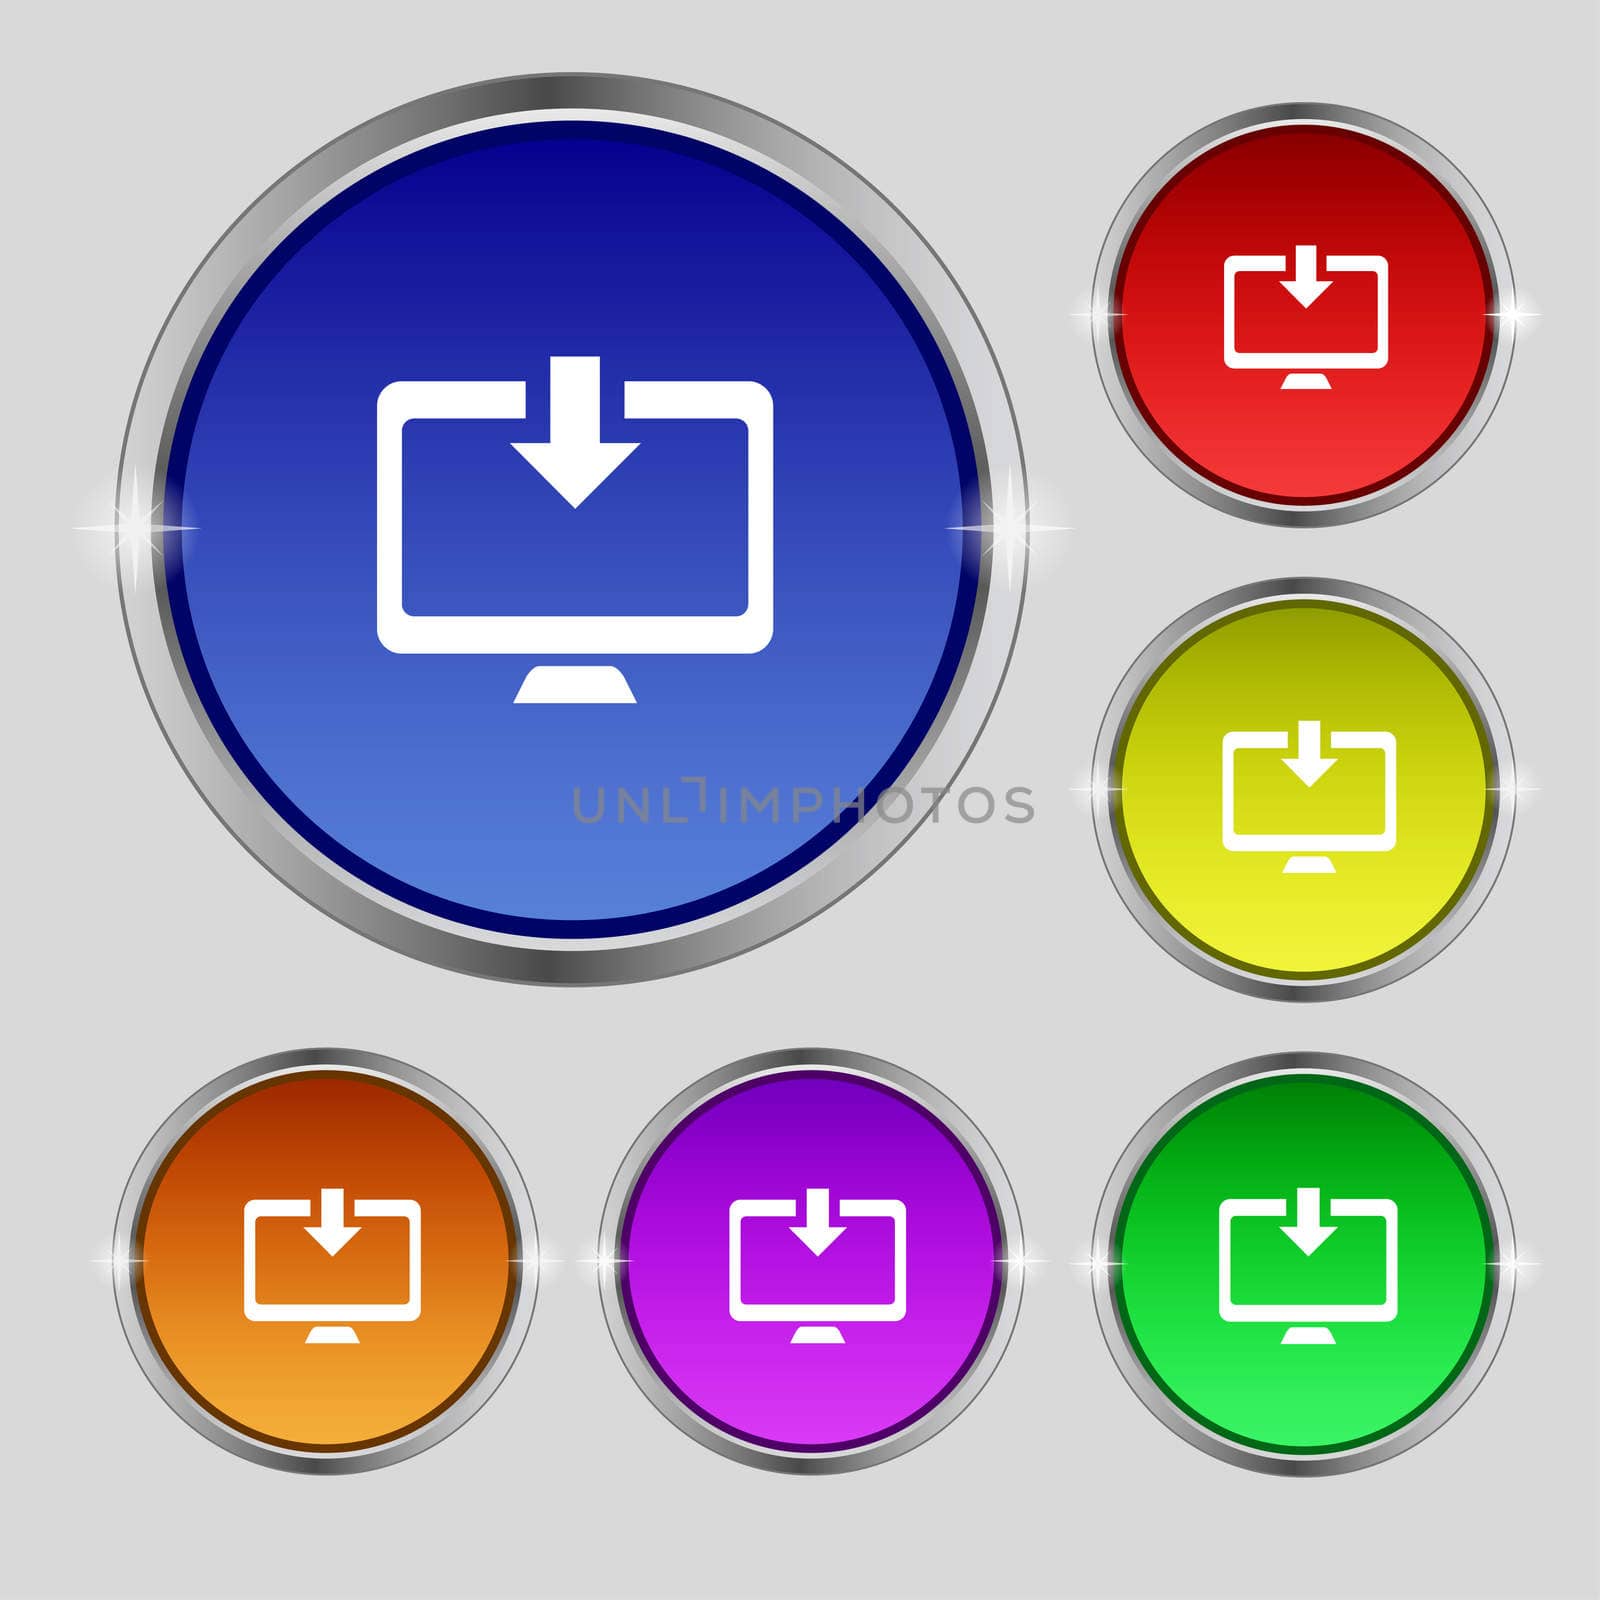 Download, Load, Backup icon sign. Round symbol on bright colourful buttons. illustration